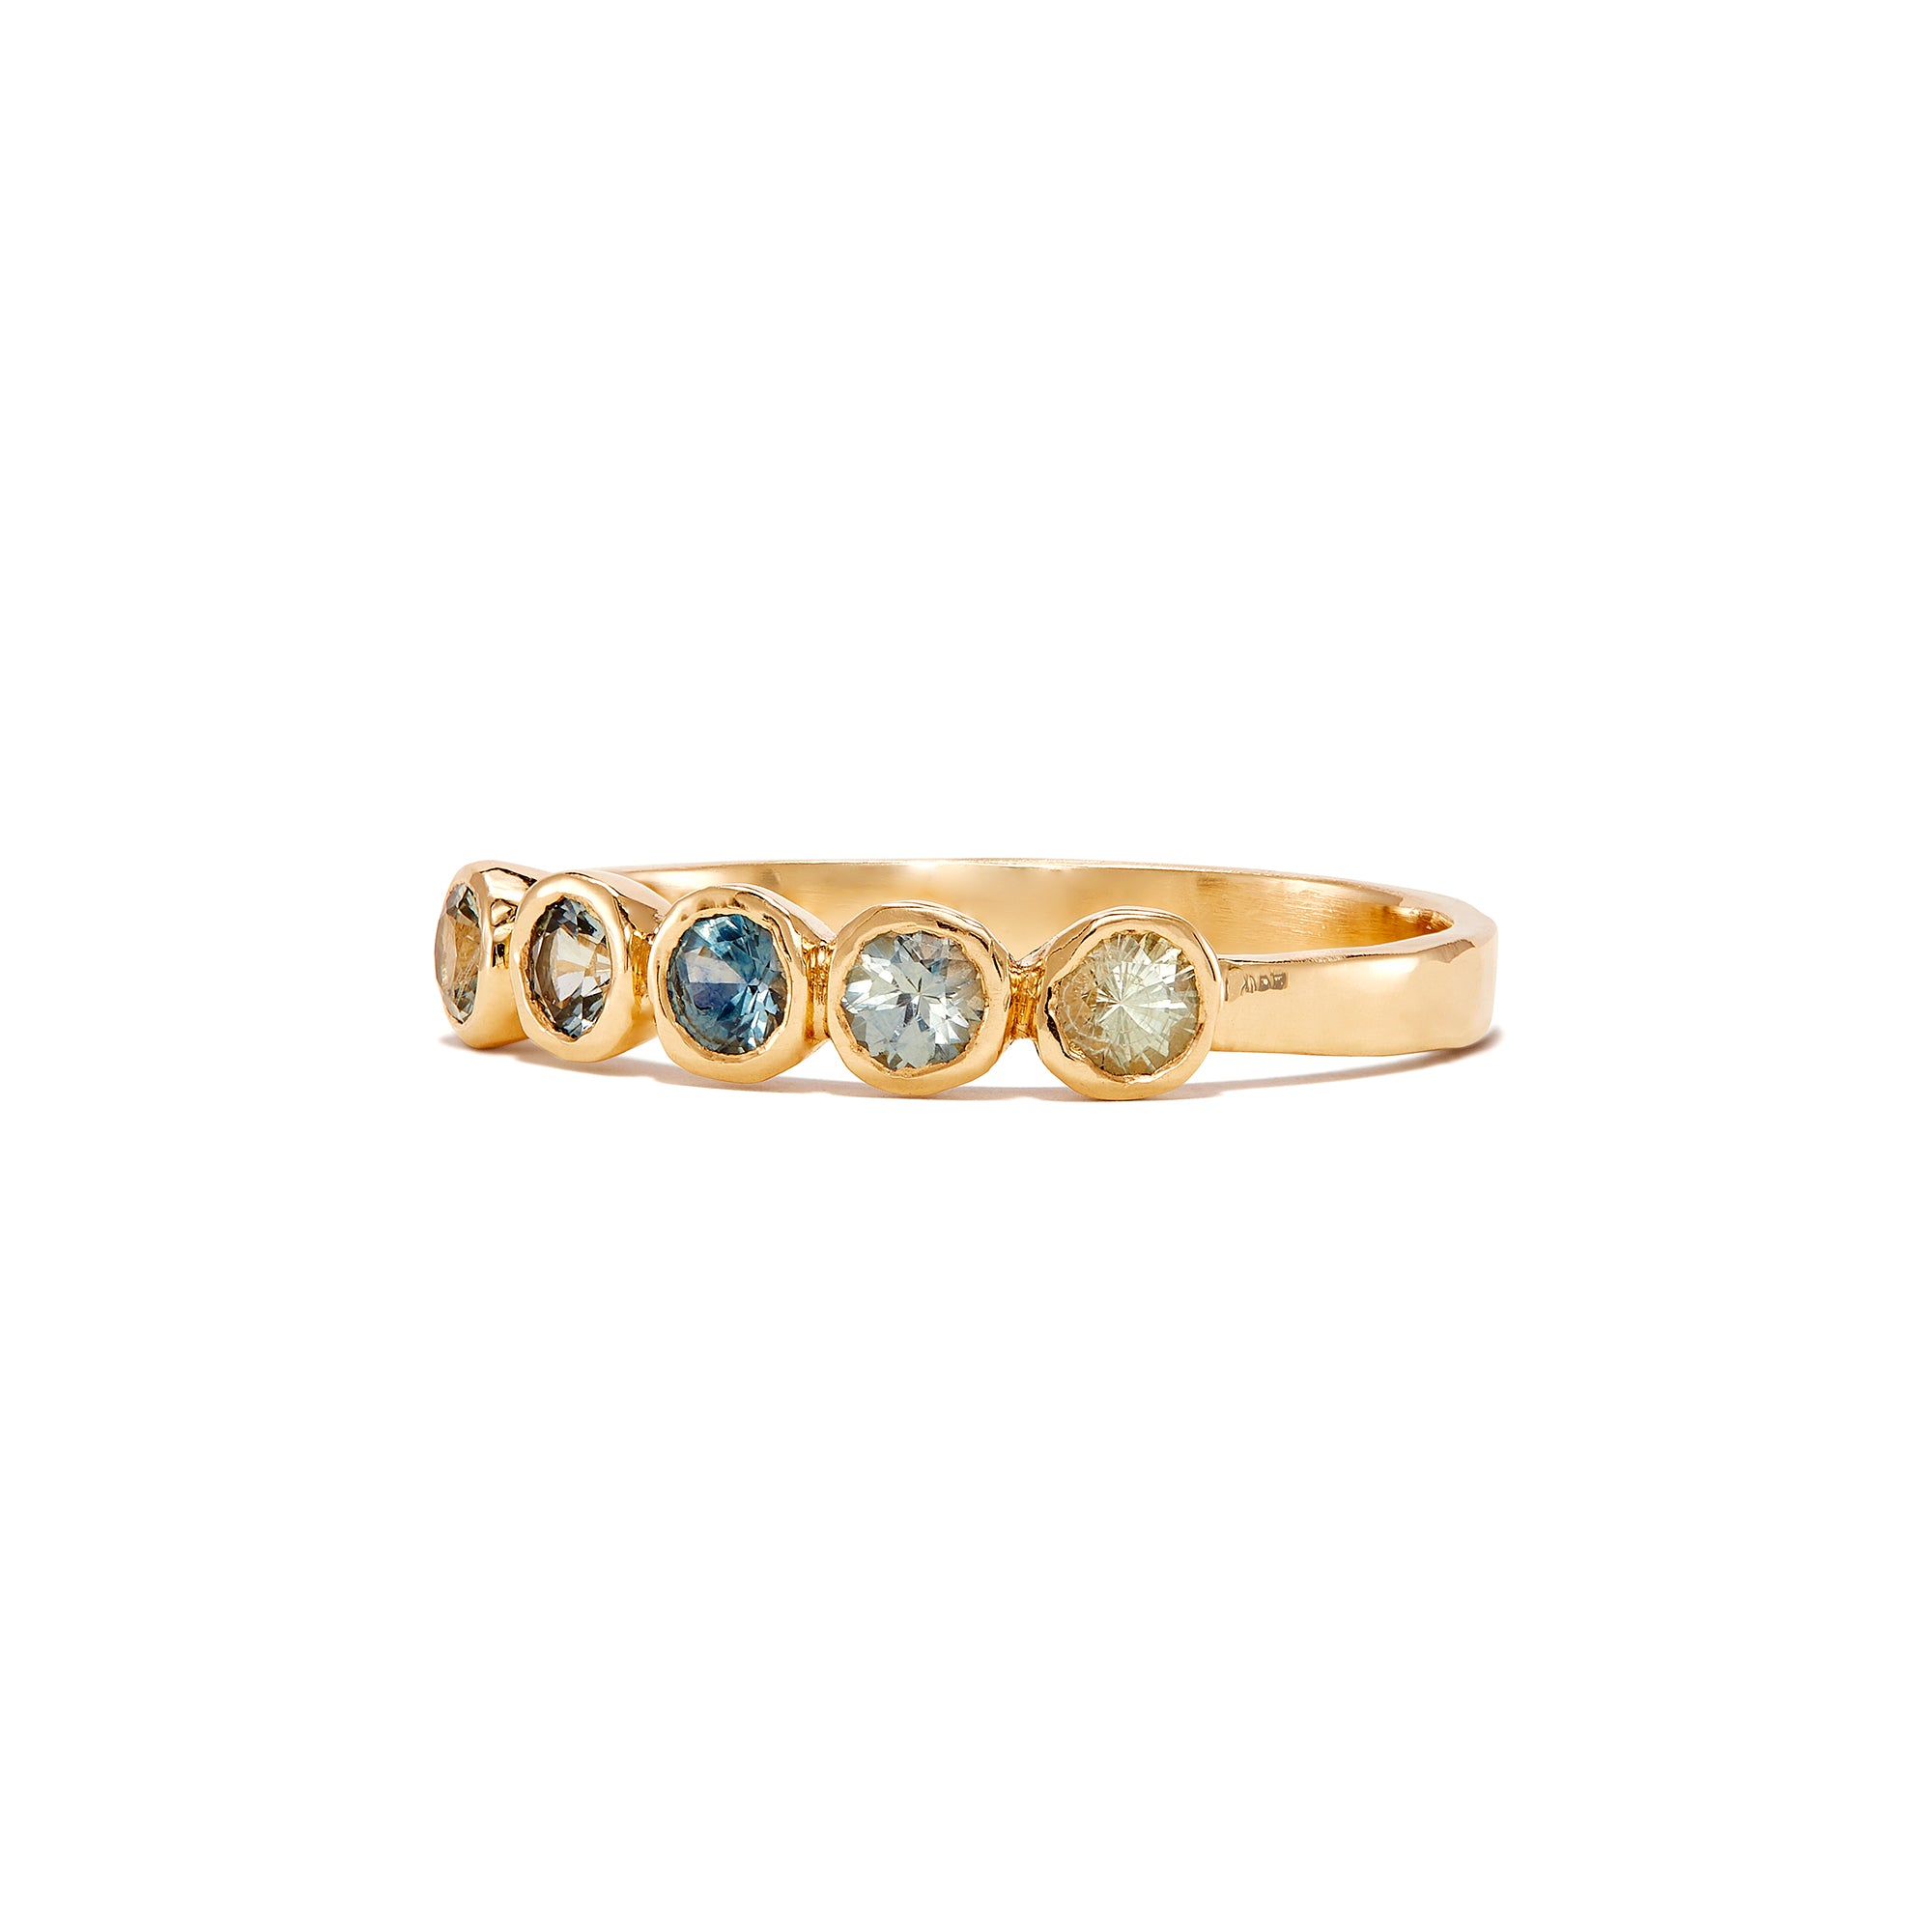 Limited Edition Blue Montana Sapphire Five Stone Ring